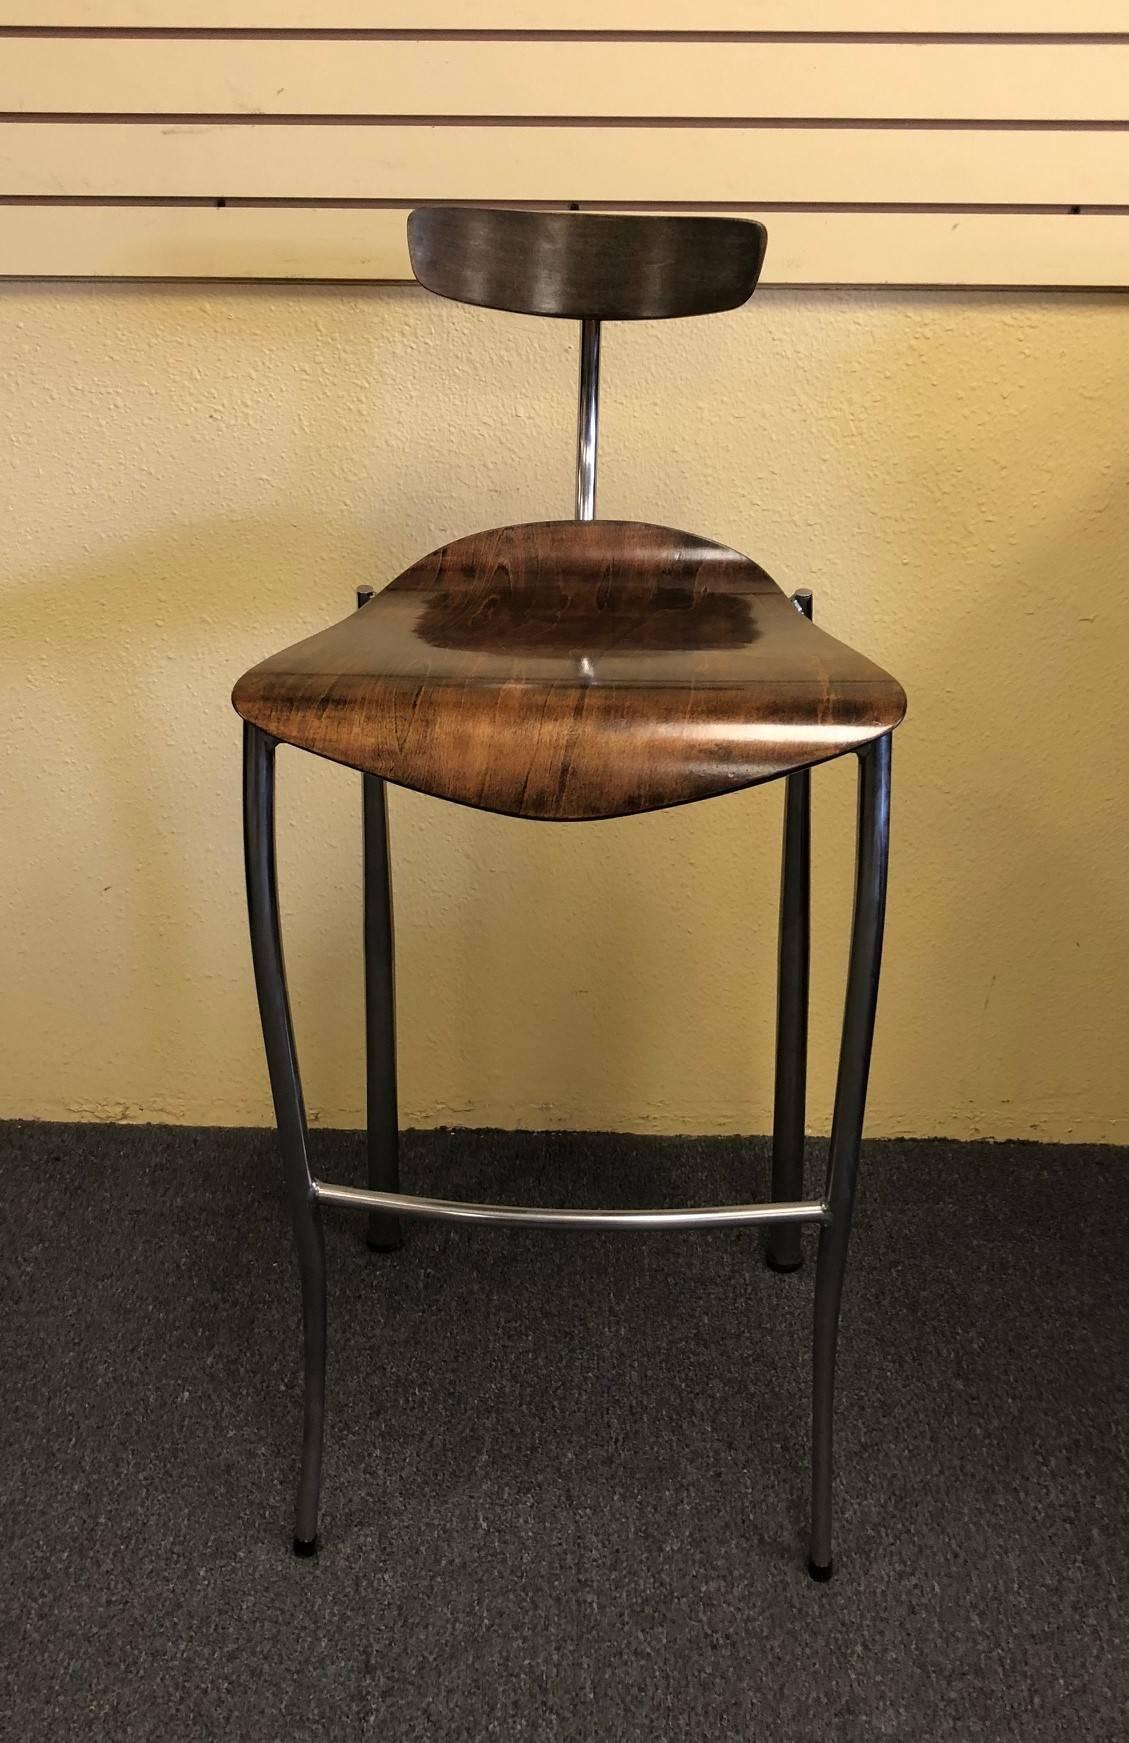 A very stylish and functional pair of bent walnut wood and chrome bar stools made in France, circa 1970s.